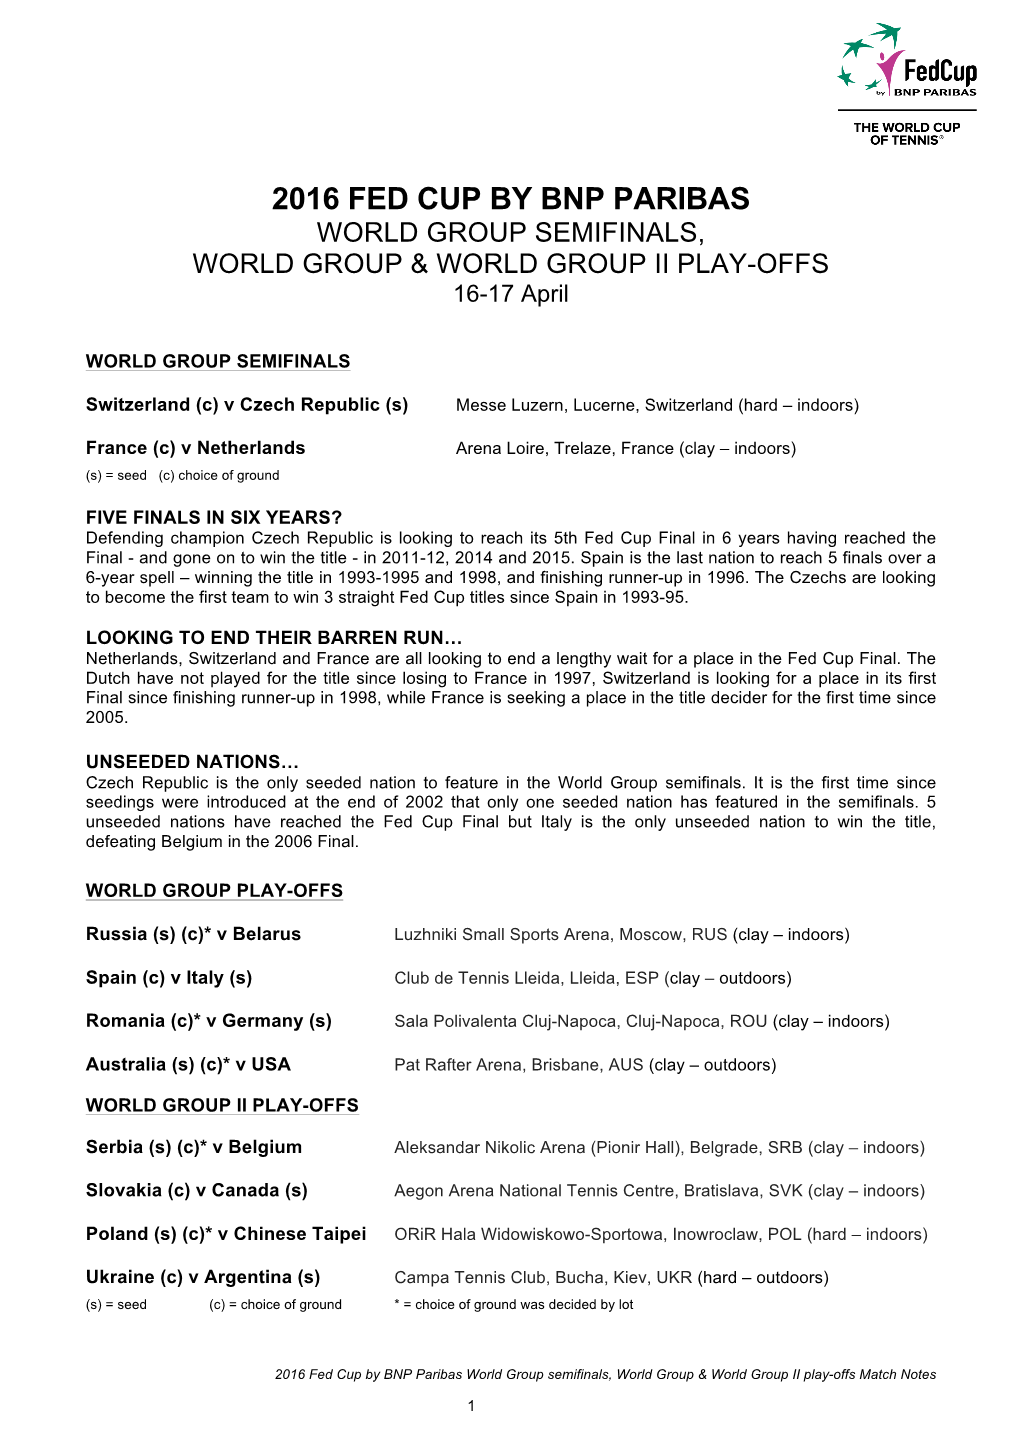 2016 FED CUP by BNP PARIBAS WORLD GROUP SEMIFINALS, WORLD GROUP & WORLD GROUP II PLAY-OFFS 16-17 April